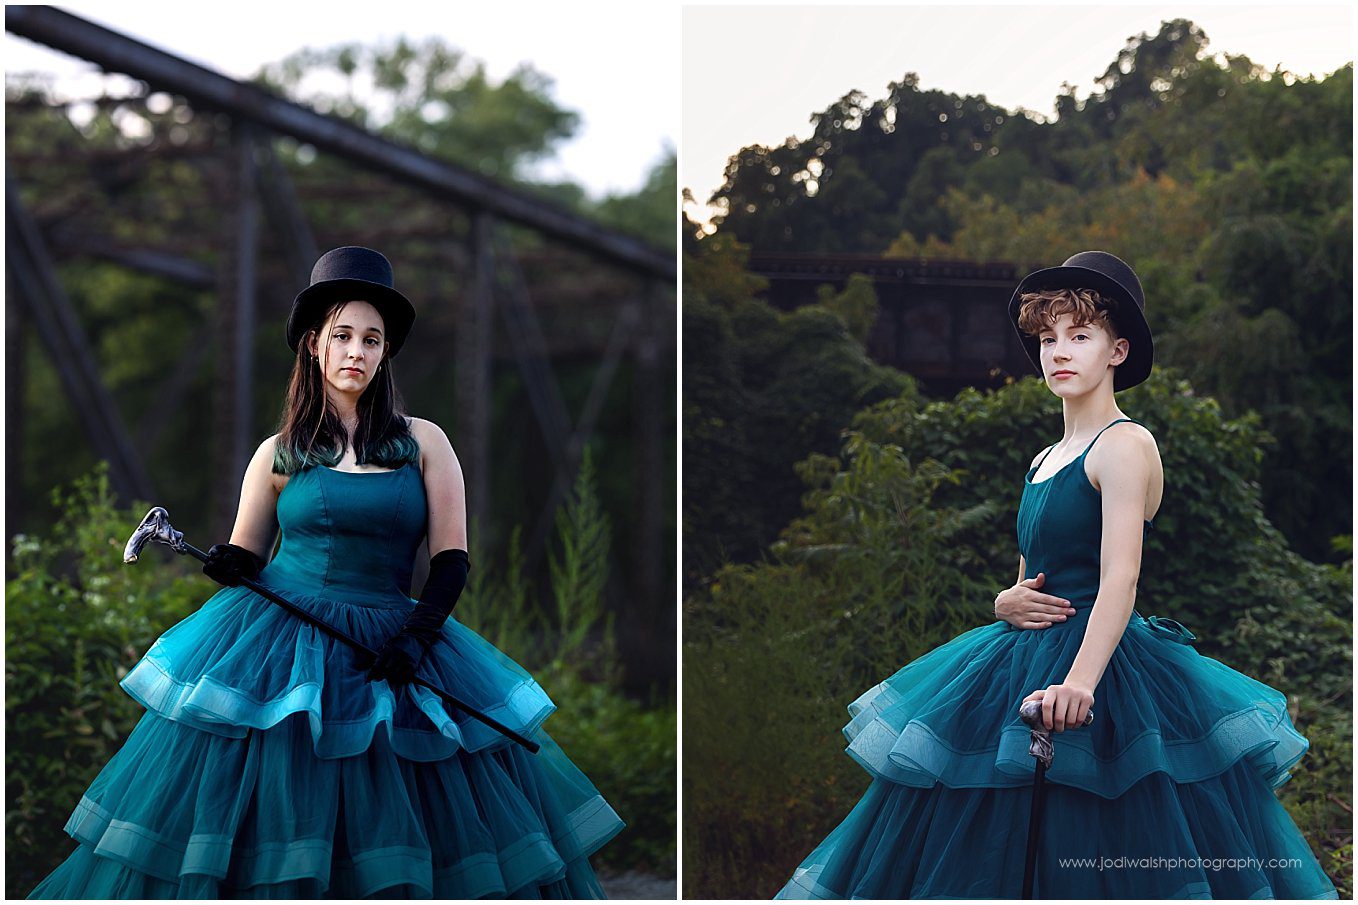 images of two teens, each wearing a teal gown and top hat.  Both are standing in front of a train trestle and each have a black cane in their hands.  The images show how the same dress can work on two different teens